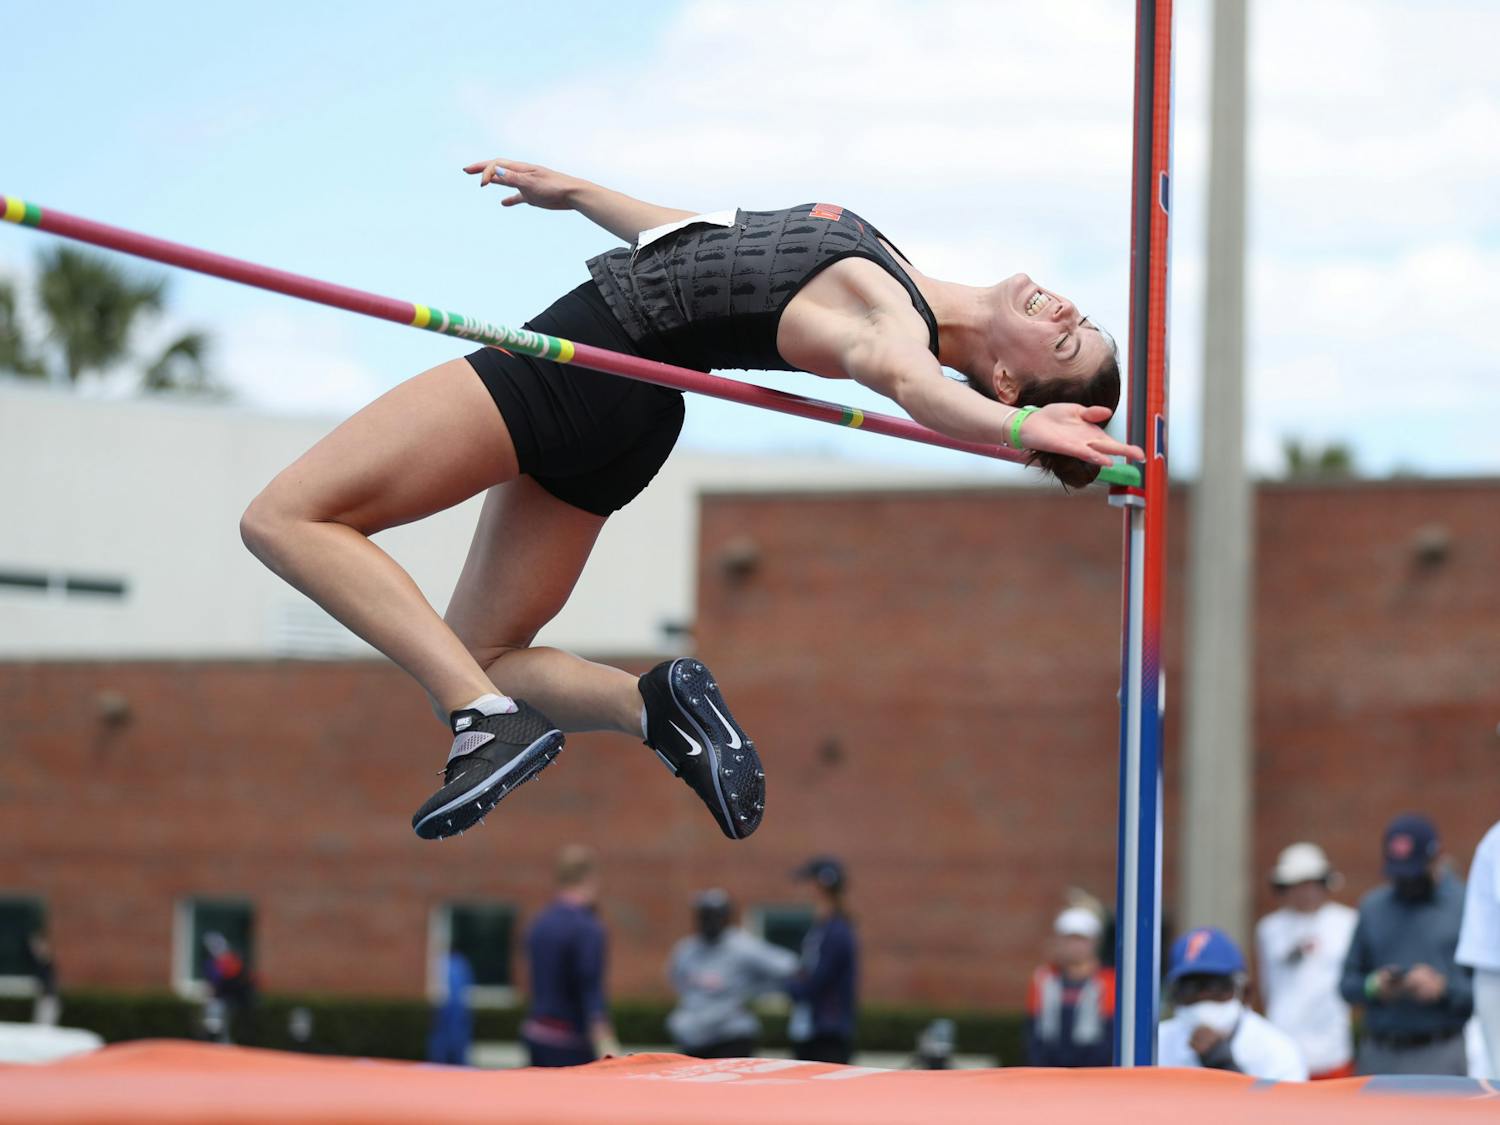 Florida's Claire Bryant competes in the high jump during the Pepsi Florida Relays on Saturday, April 3, 2021 at Percy Beard Track at James G. Pressly Stadium in Gainesville, Fla. / UAA Communications photo by Tiffany Franco